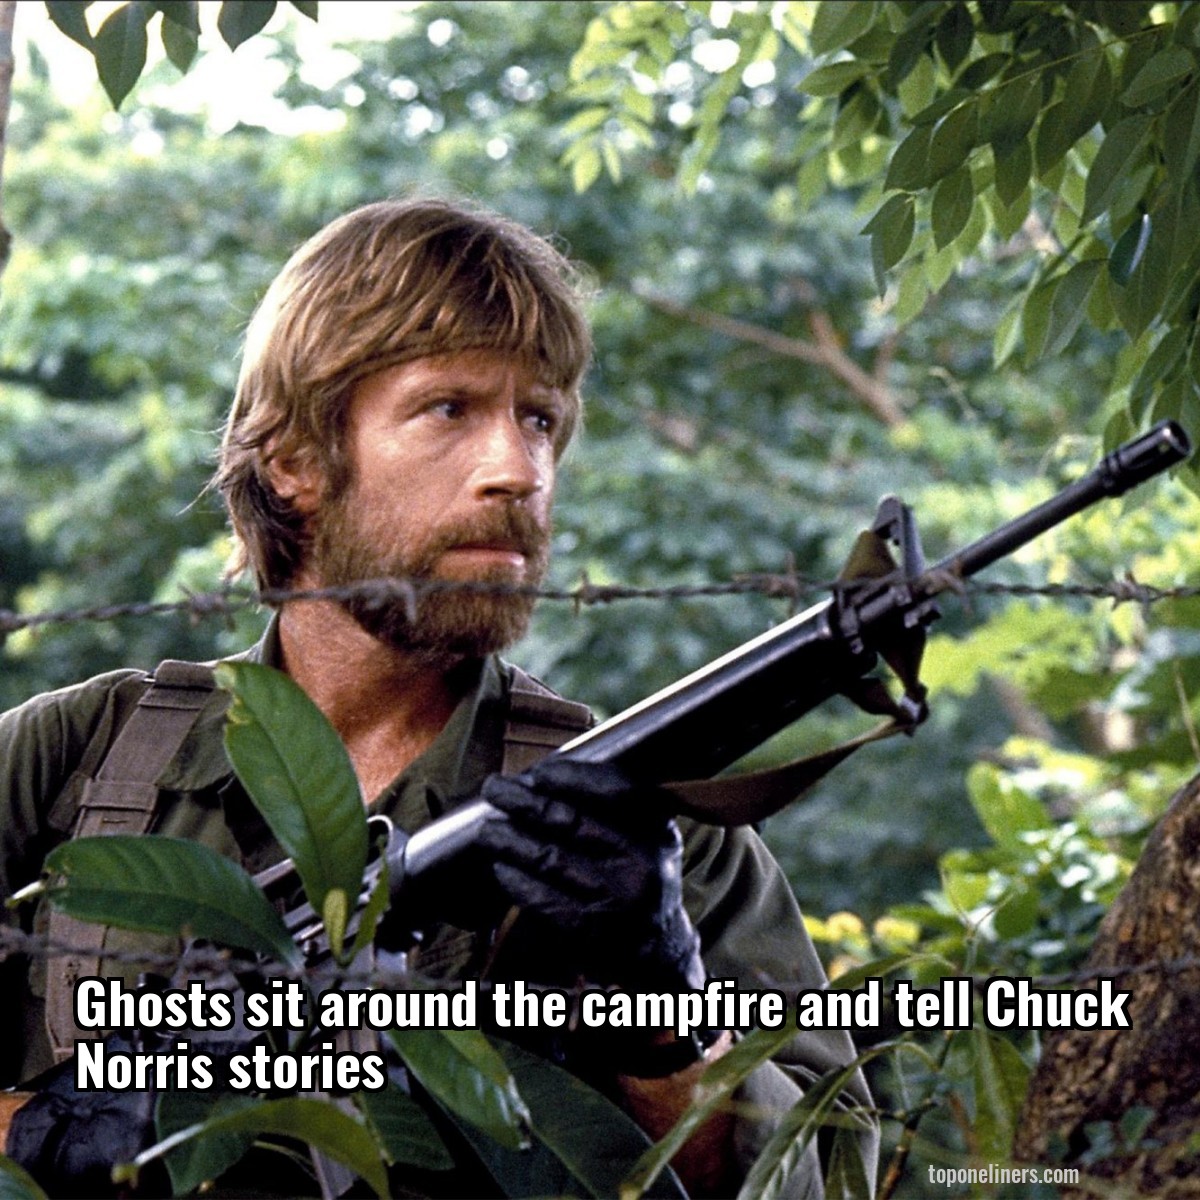 Ghosts sit around the campfire and tell Chuck Norris stories